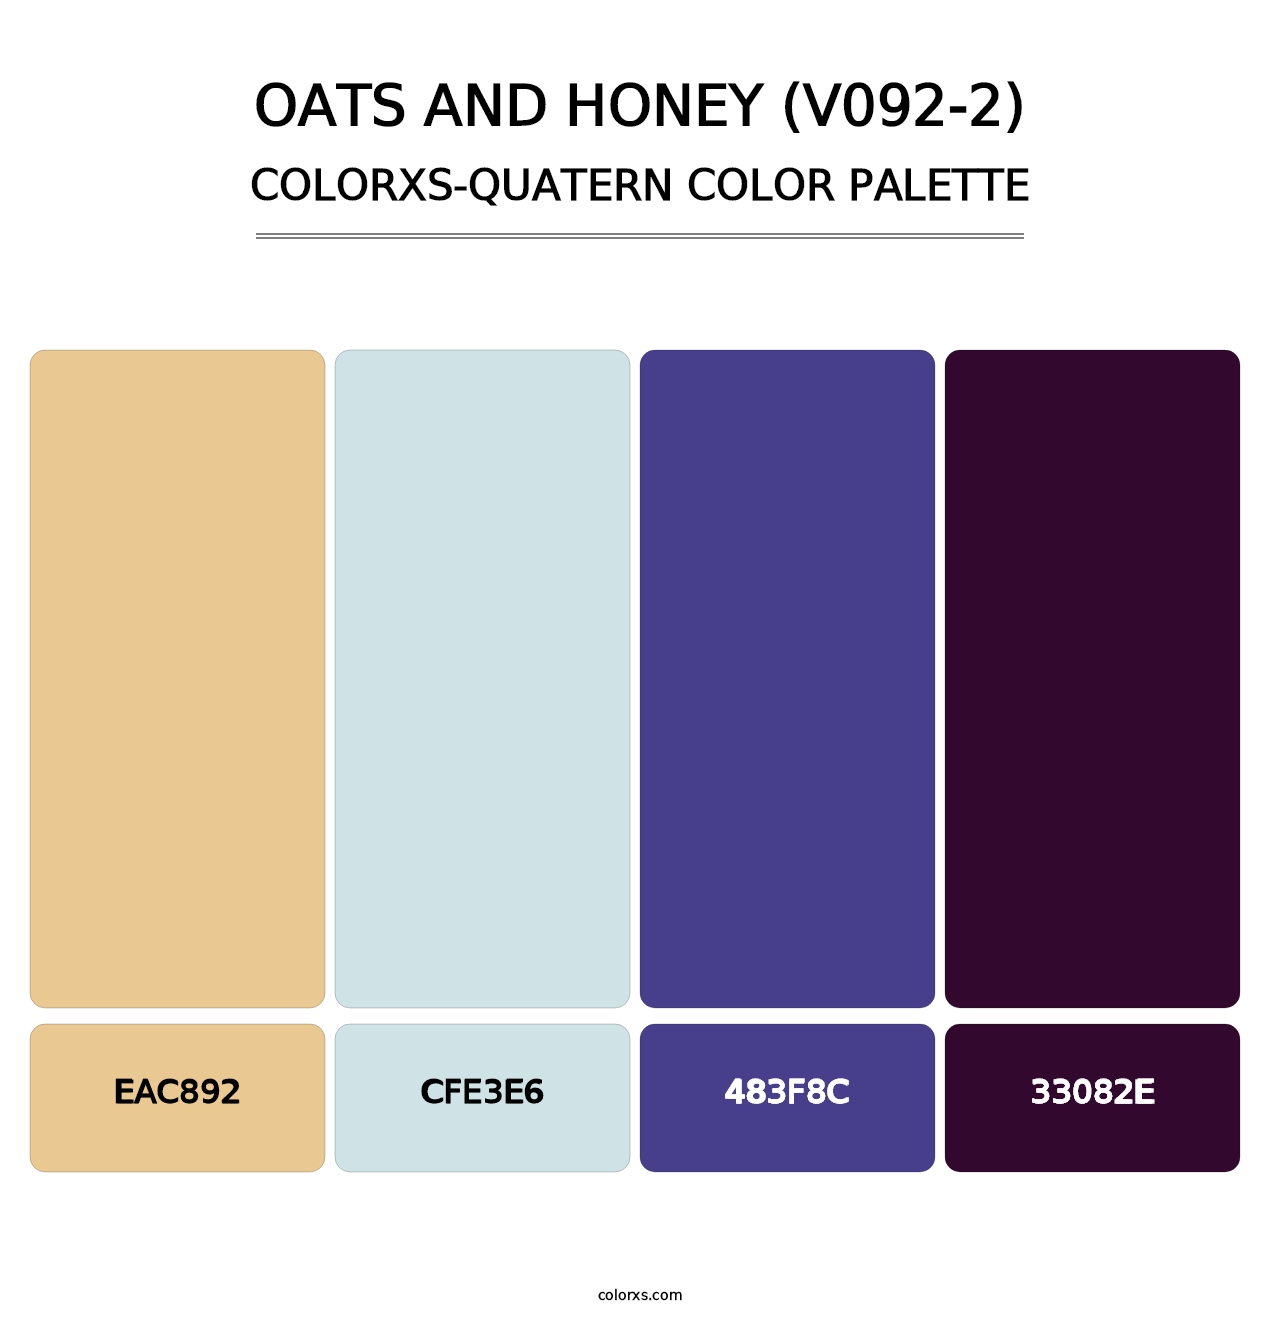 Oats and Honey (V092-2) - Colorxs Quatern Palette